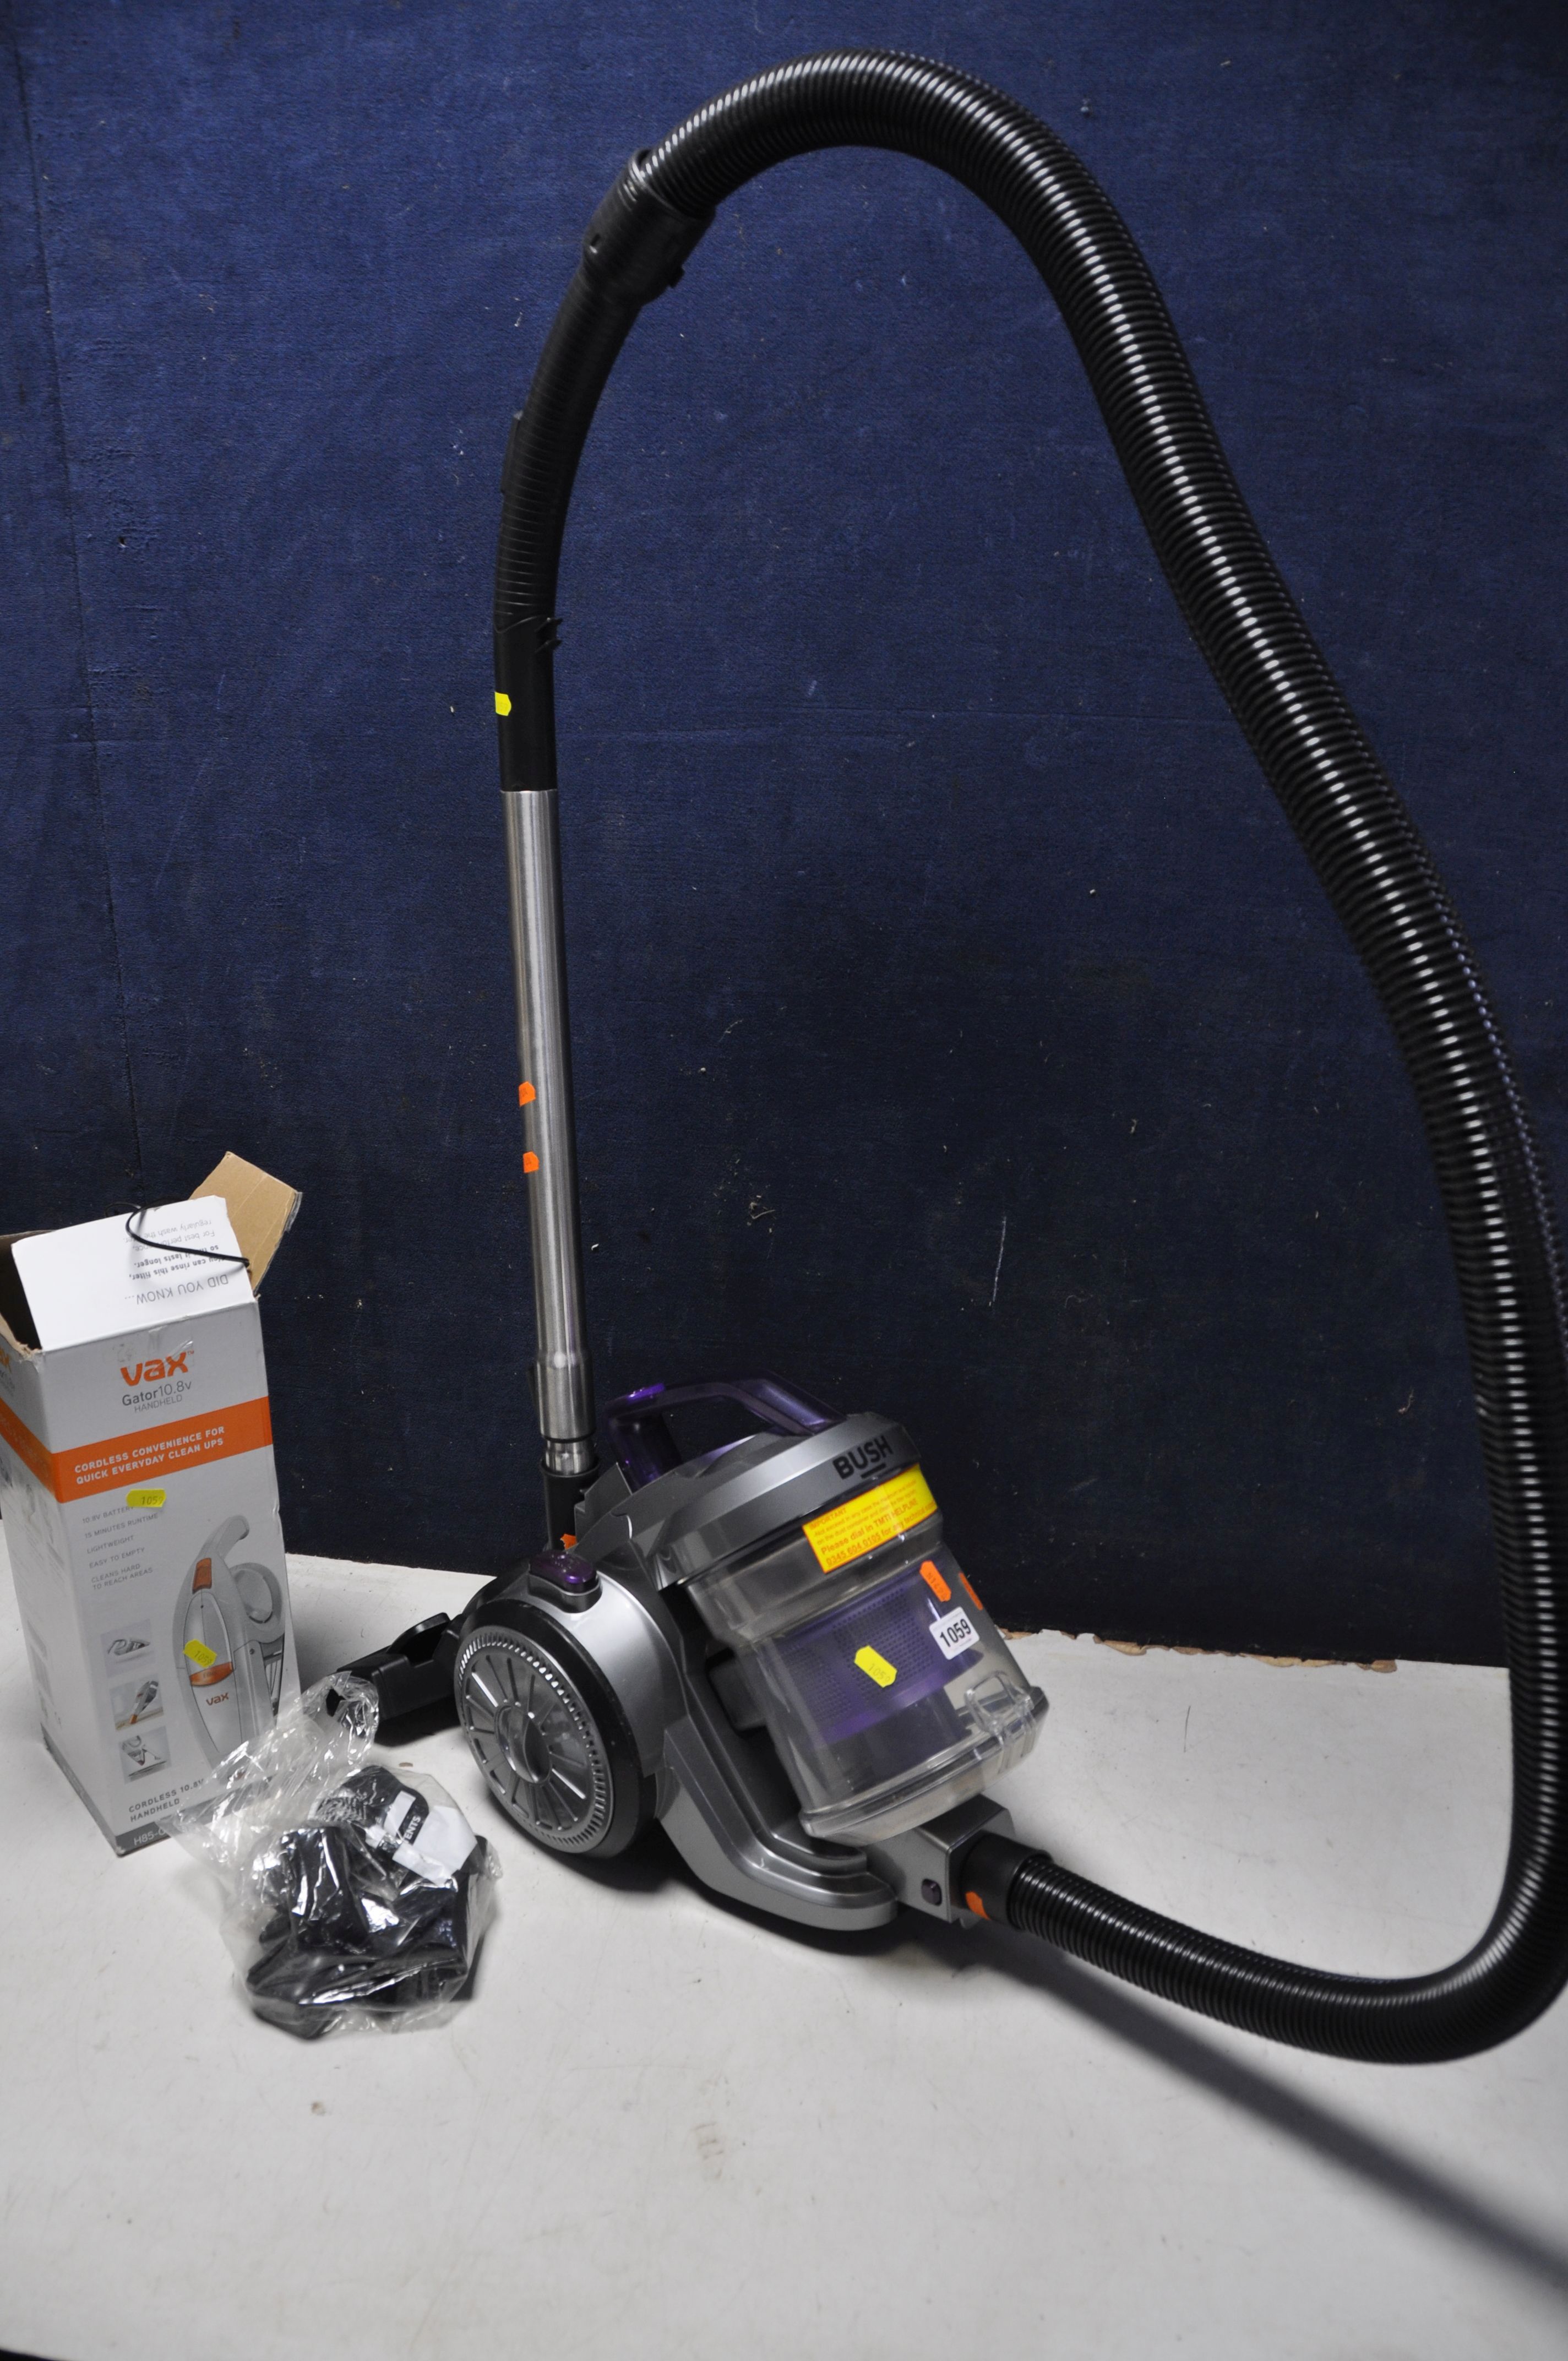 A BUSH BT-ZW-9031SO8 VACUUM CLEANER along with a Vax H85-GA-B10 cordless handheld vacuum cleaner (